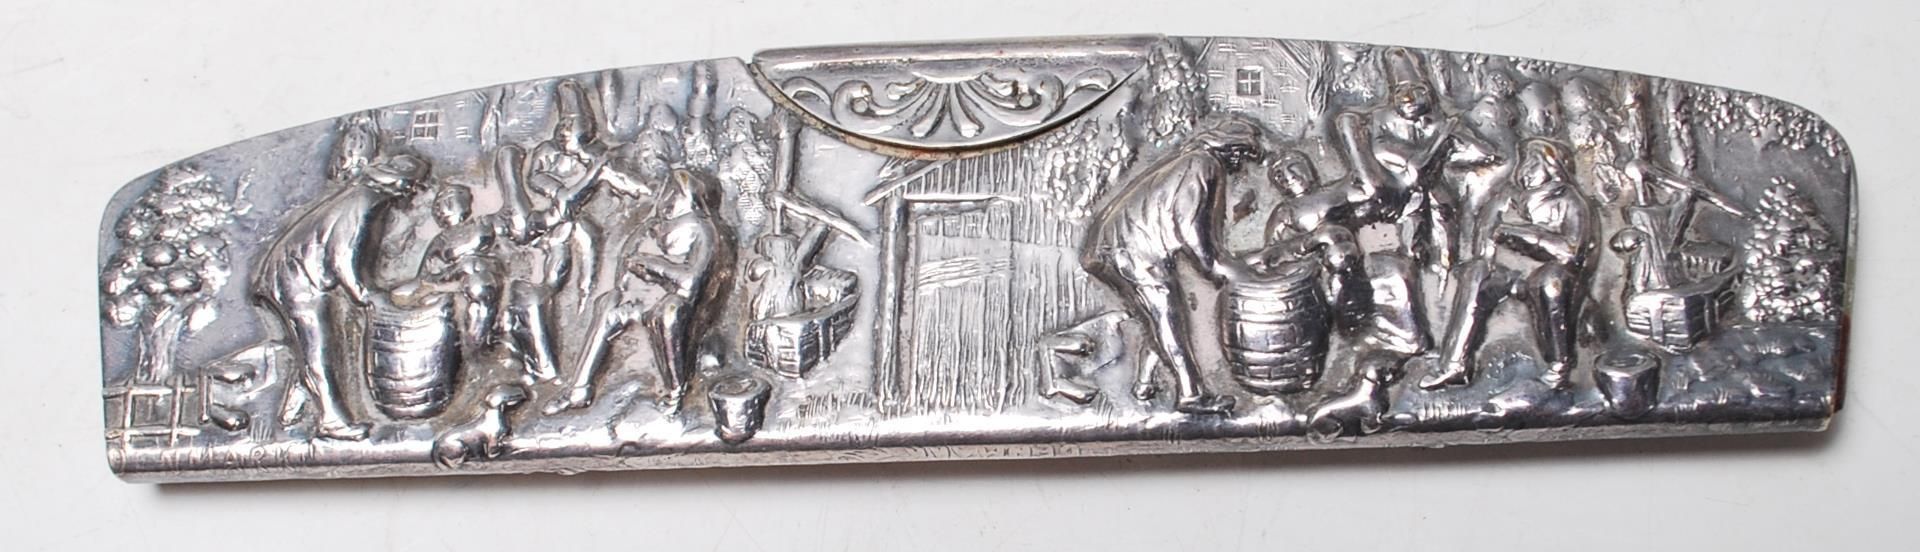 ANTIQUE SILVER DRESSING TABLE ITEMS - Image 9 of 11